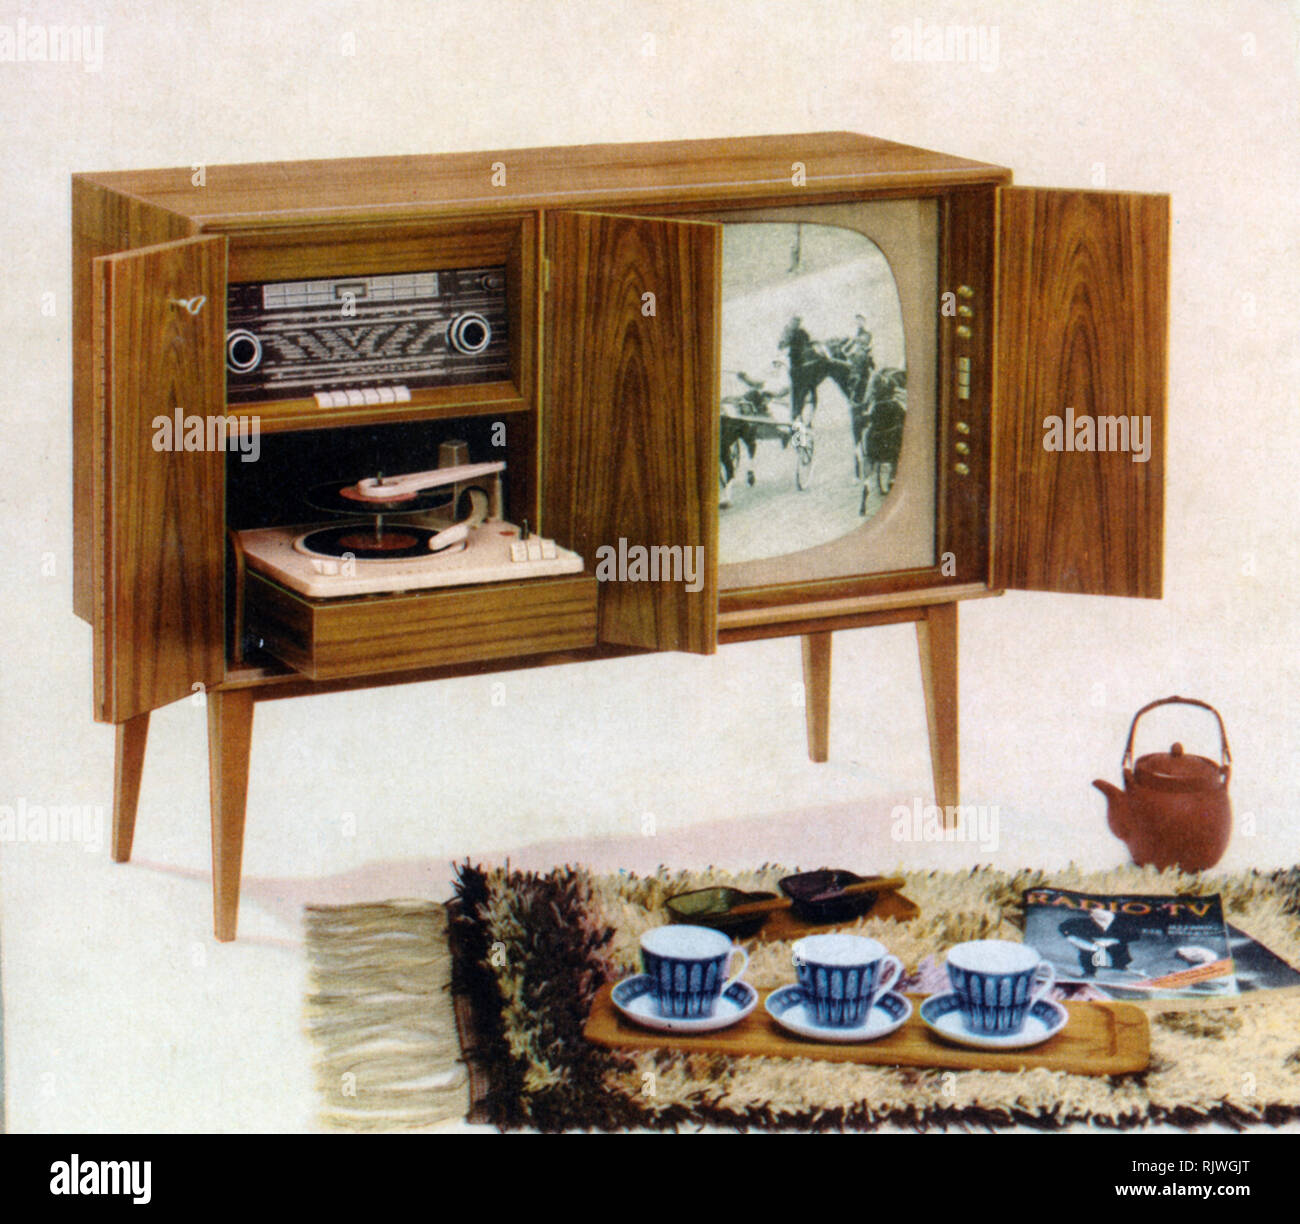 Television in the early 1960s. The swedish televison manufacturer Dux Radio and a commercial ad for their most exclusive model. A combined television, gramophone and radio in one unit a price of 2475 sek. Sweden 1960 Stock Photo